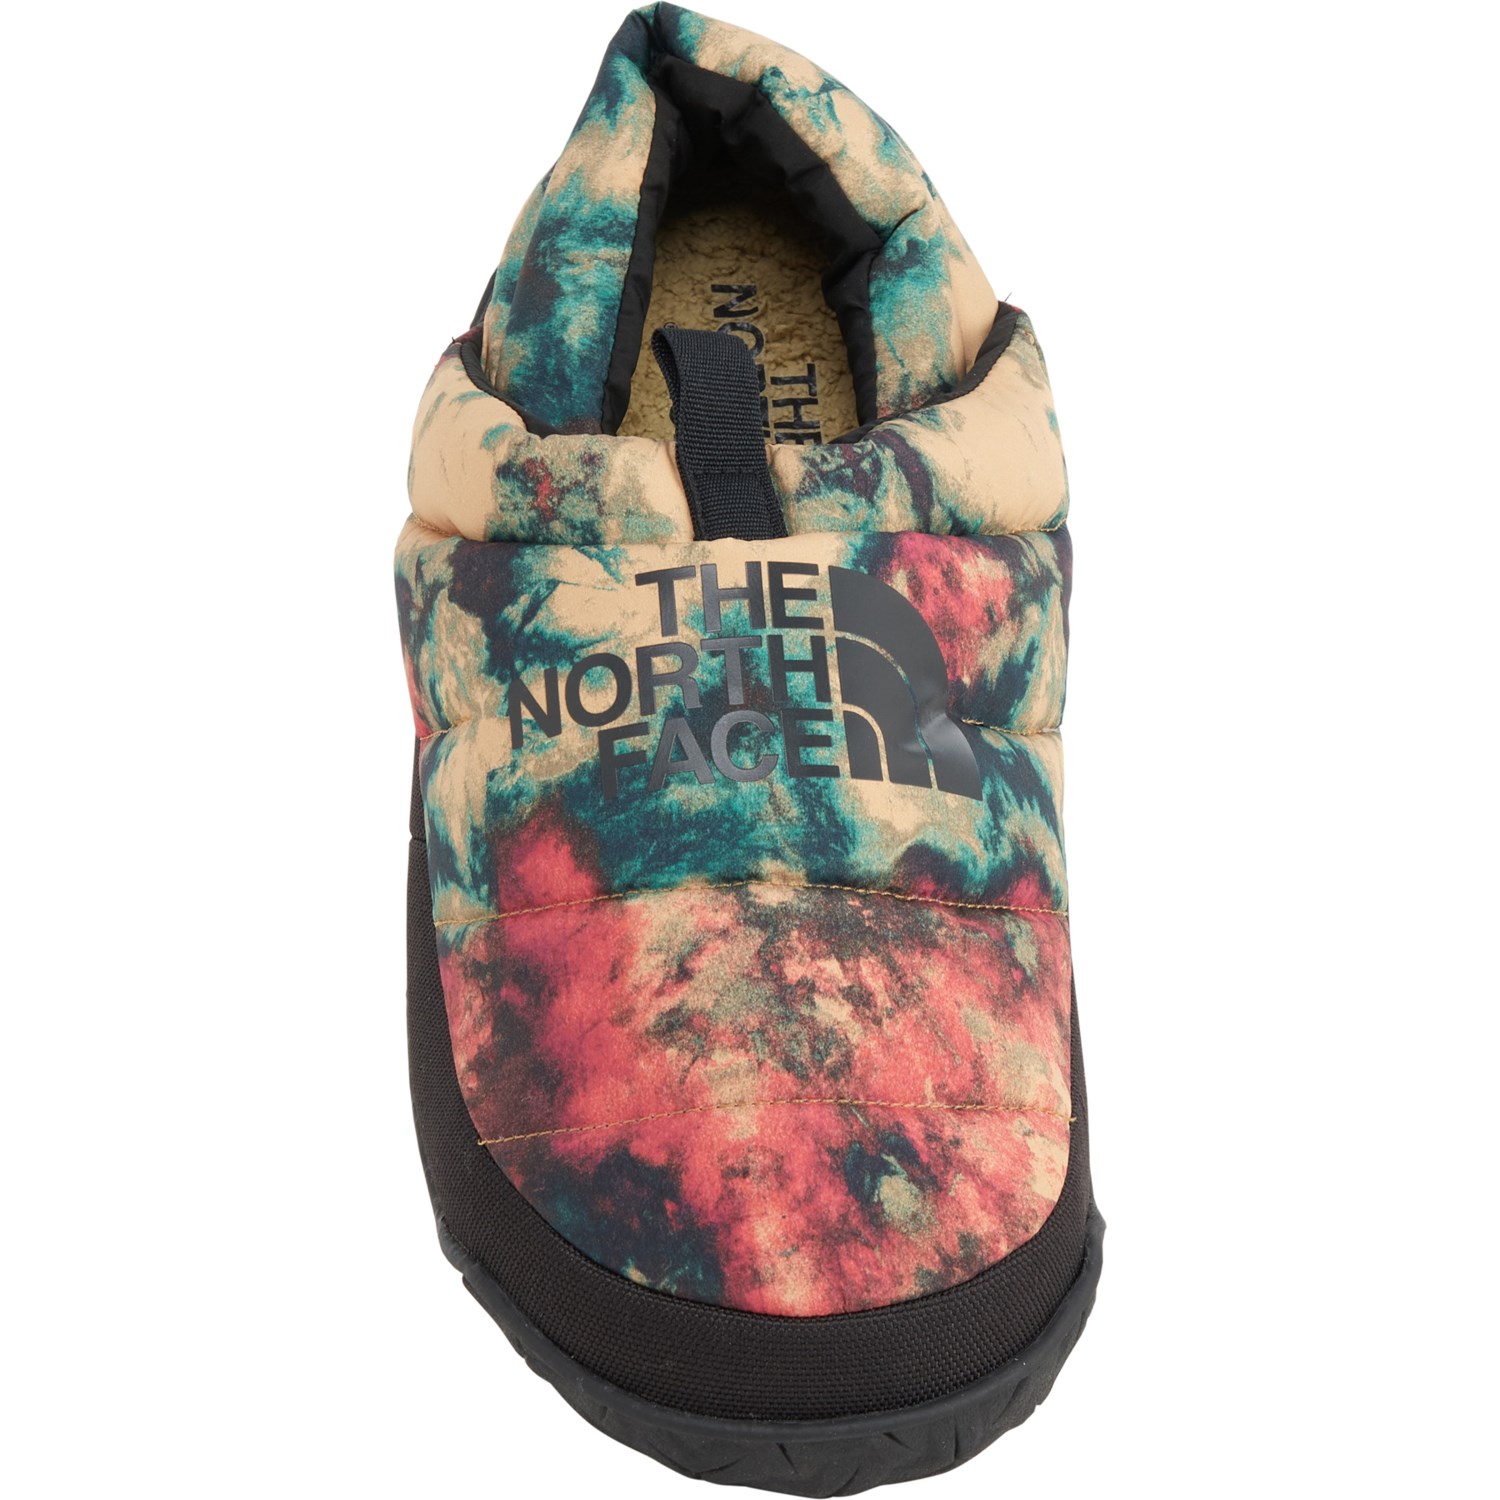 The North Face Nuptse Down Mule Shoes (For Women)